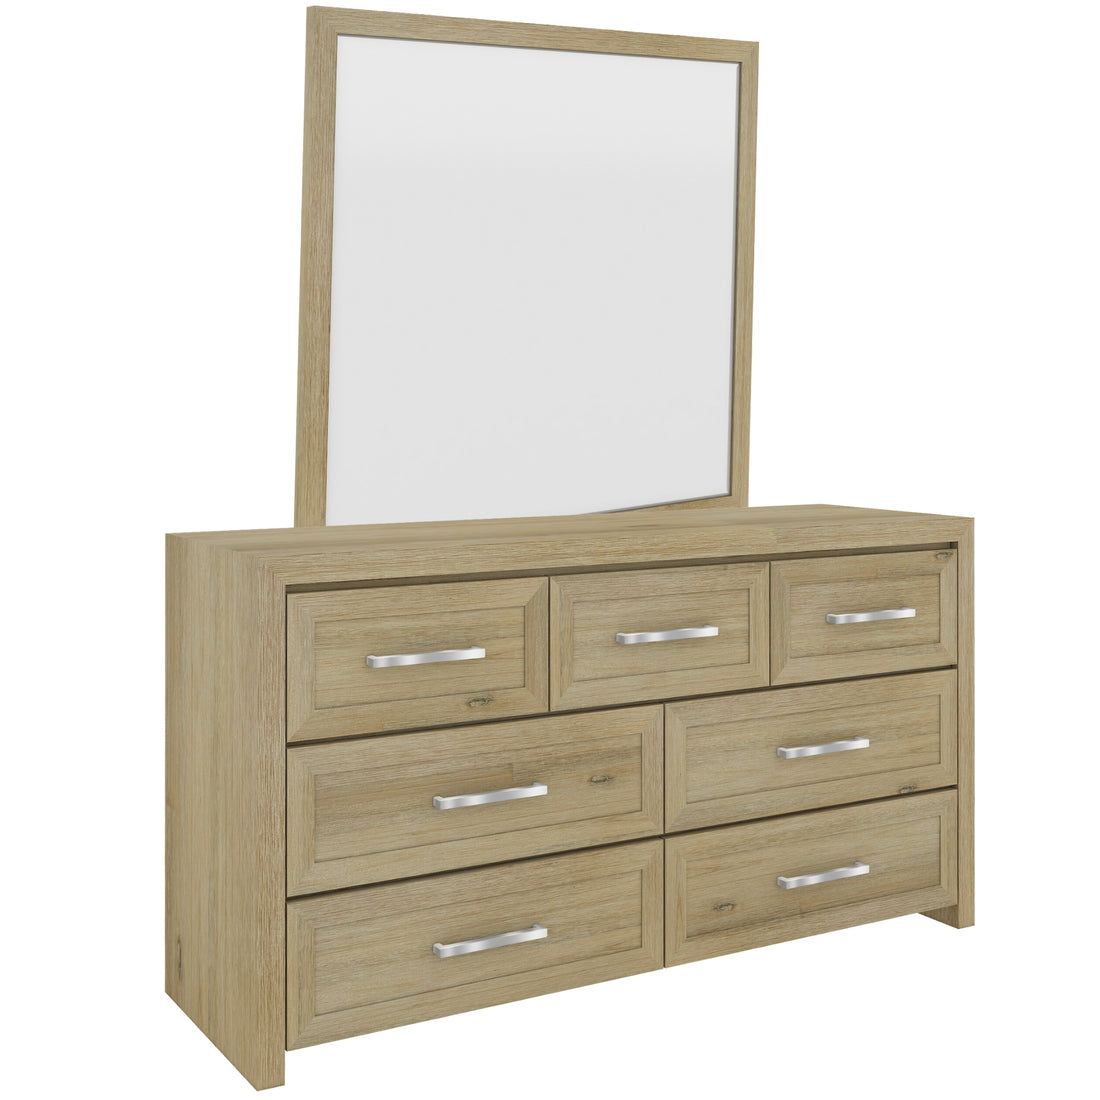 Gracelyn Dresser Mirror 7 Chest of Drawers Solid Wood Bedroom Cabinet - Smoke-Furniture &gt; Bedroom-PEROZ Accessories